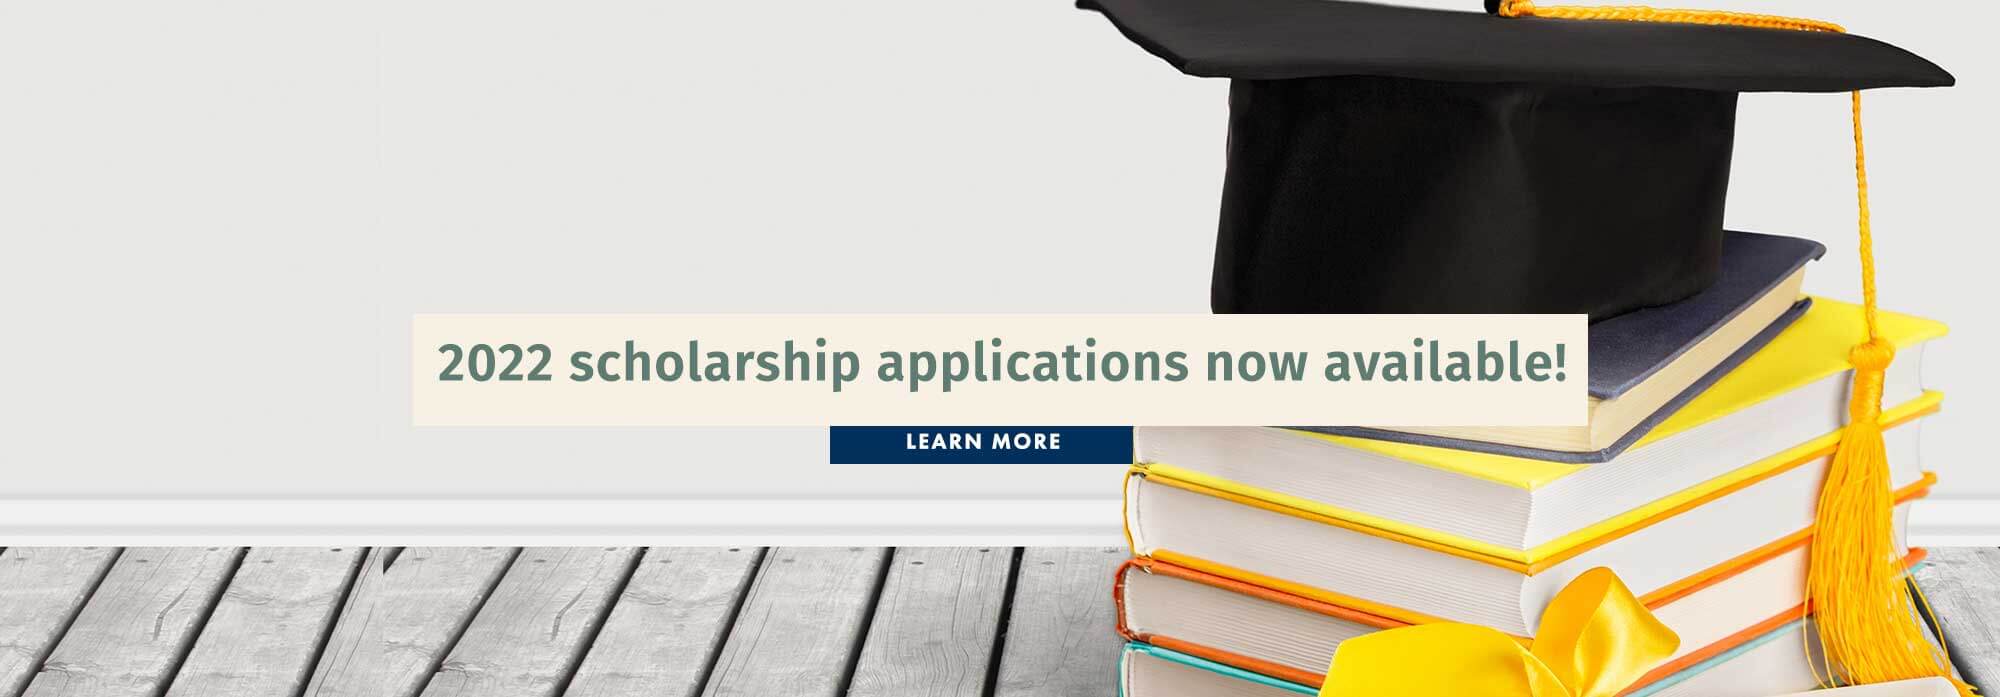 2022 scholarship applications now available!